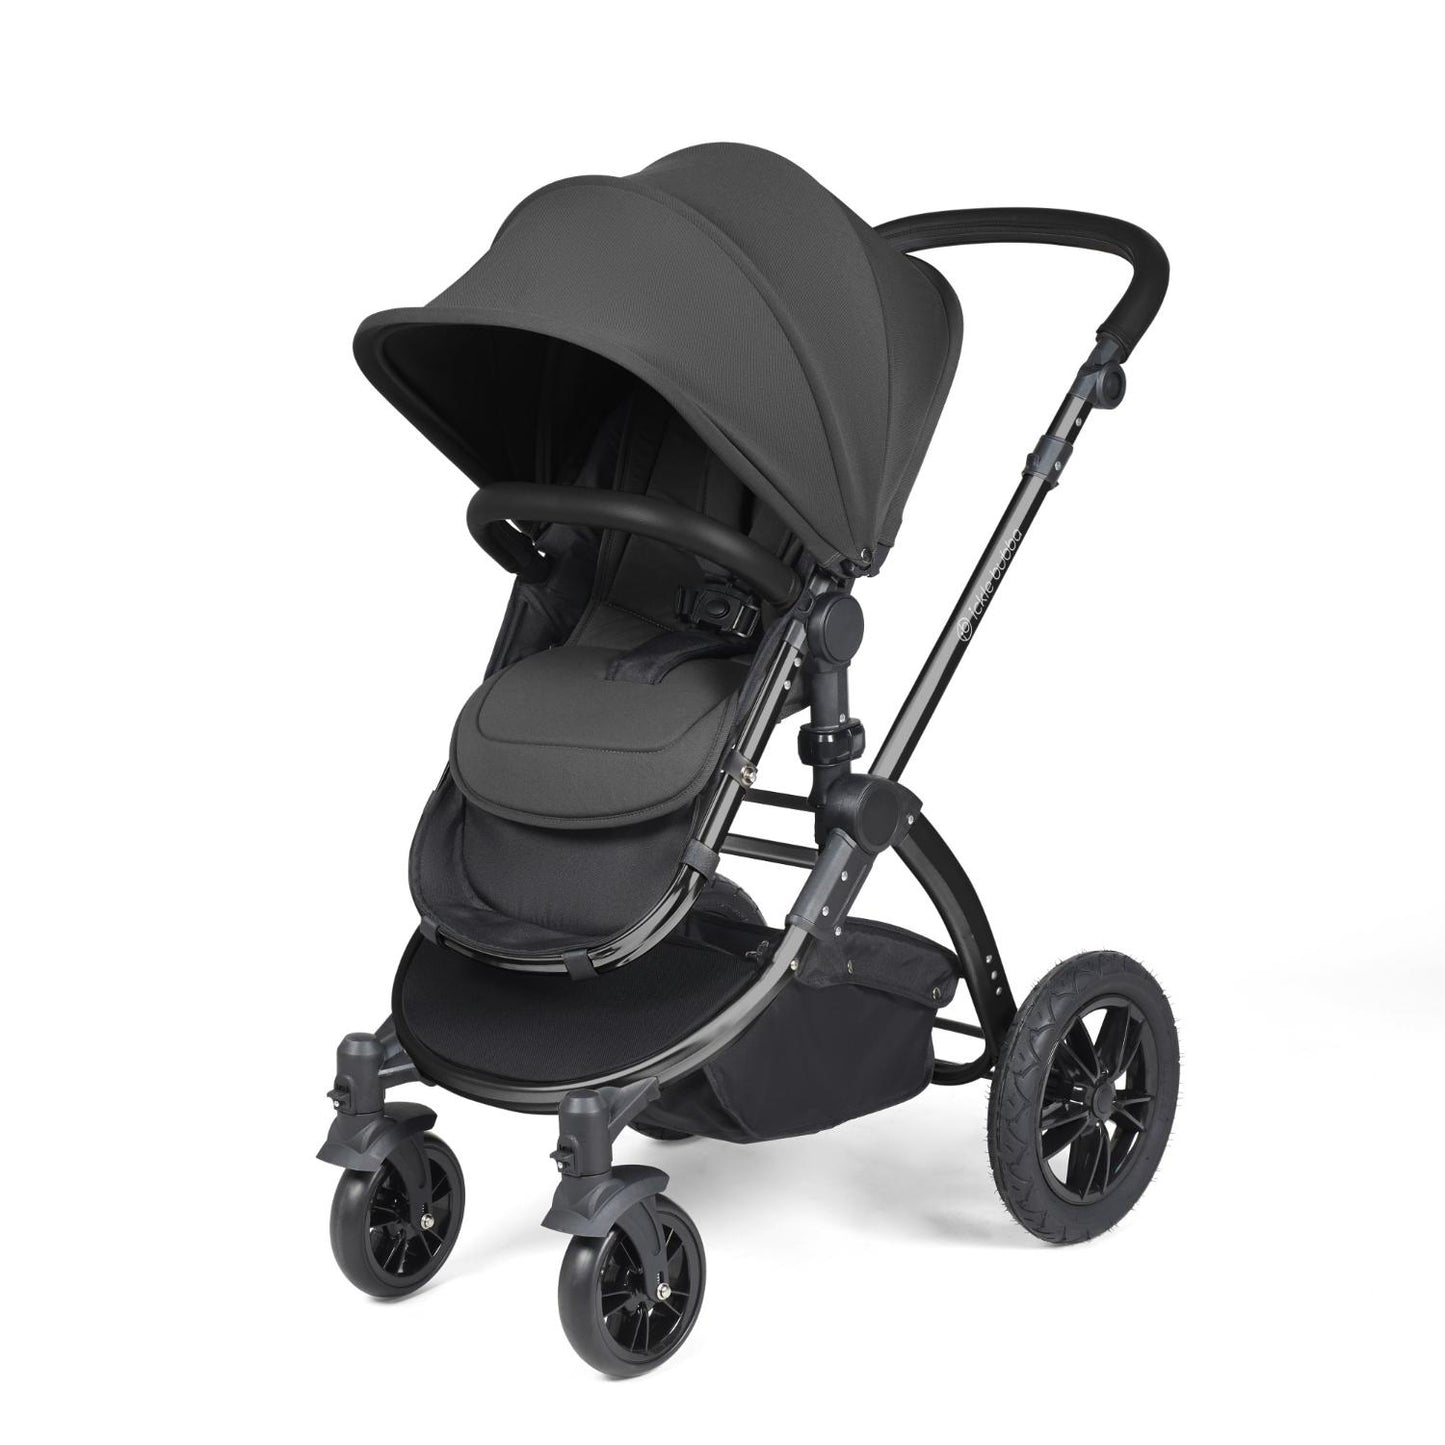 Ickle Bubba Stomp Luxe Pushchair with seat unit attached in Charcoal Grey colour